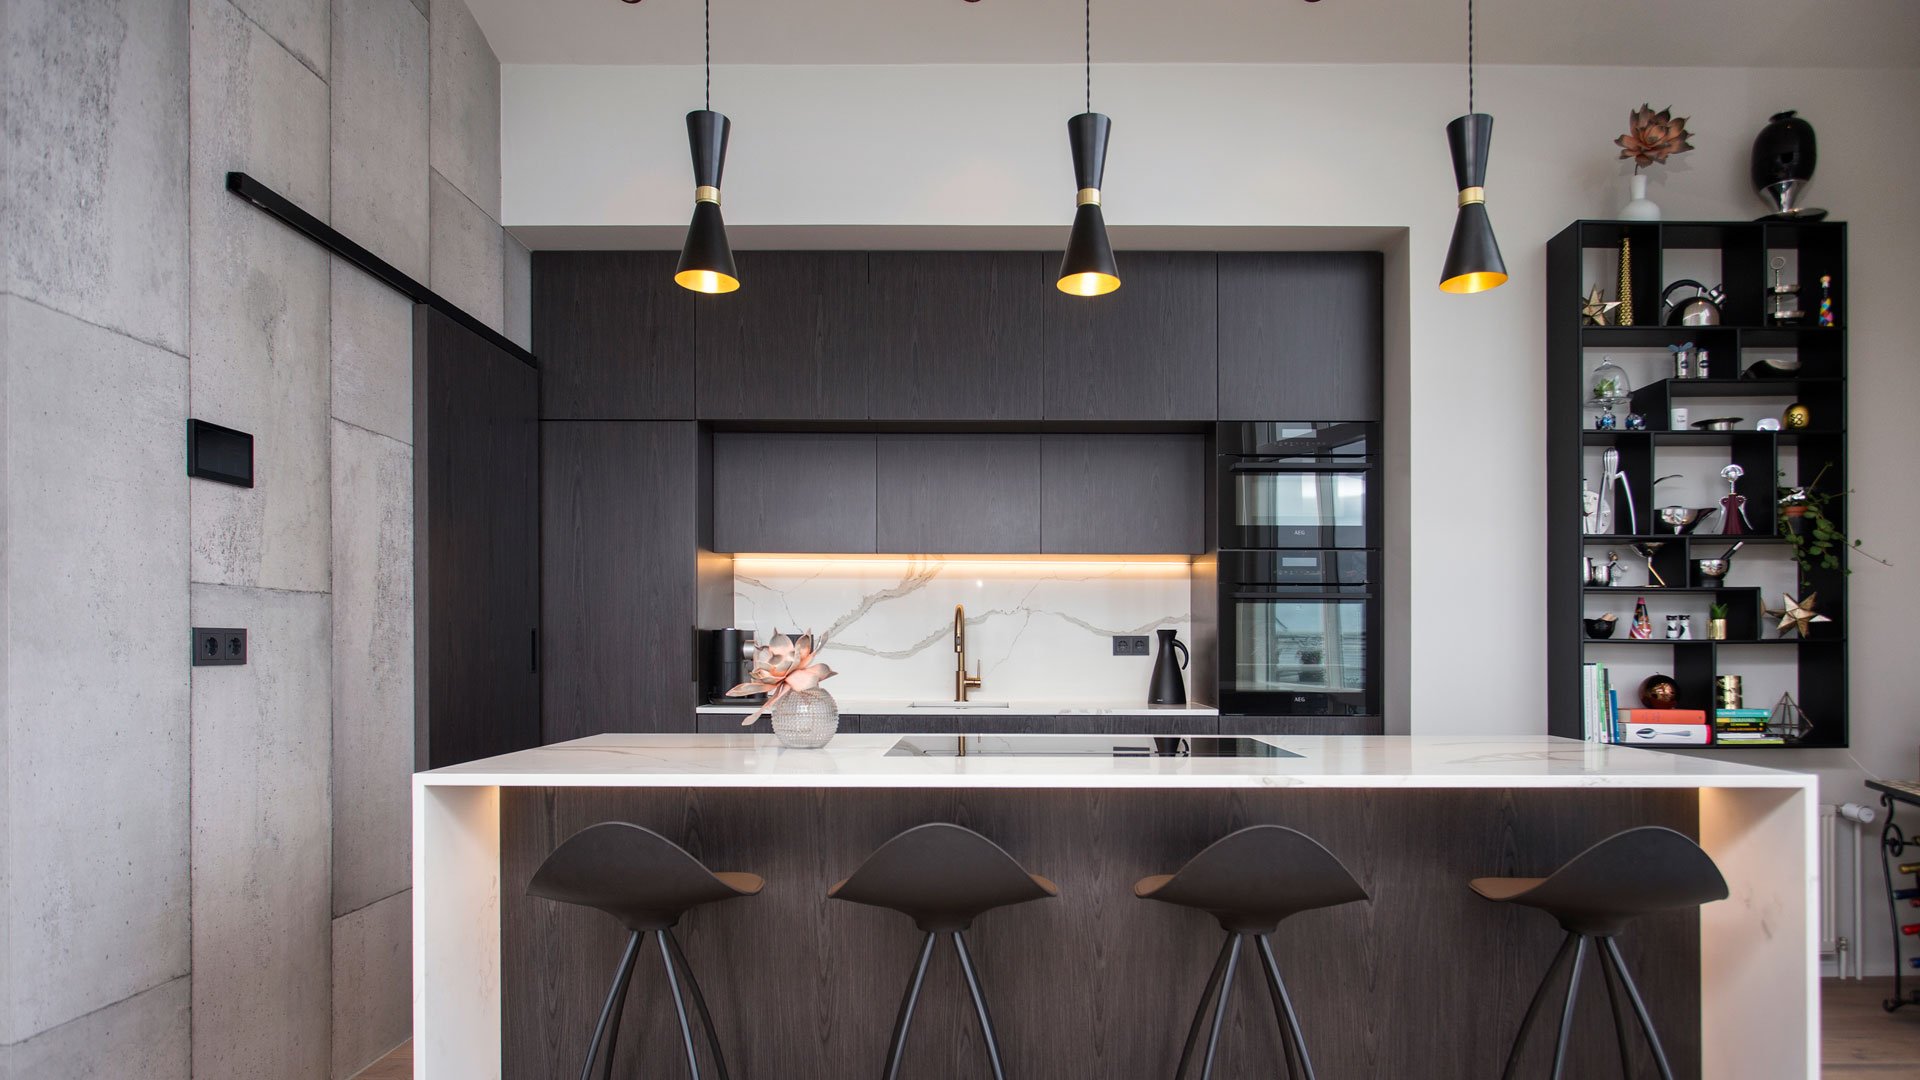 Our Cairo pendants add a subtle mid-century modern aesthetic to this Icelandic kitchen